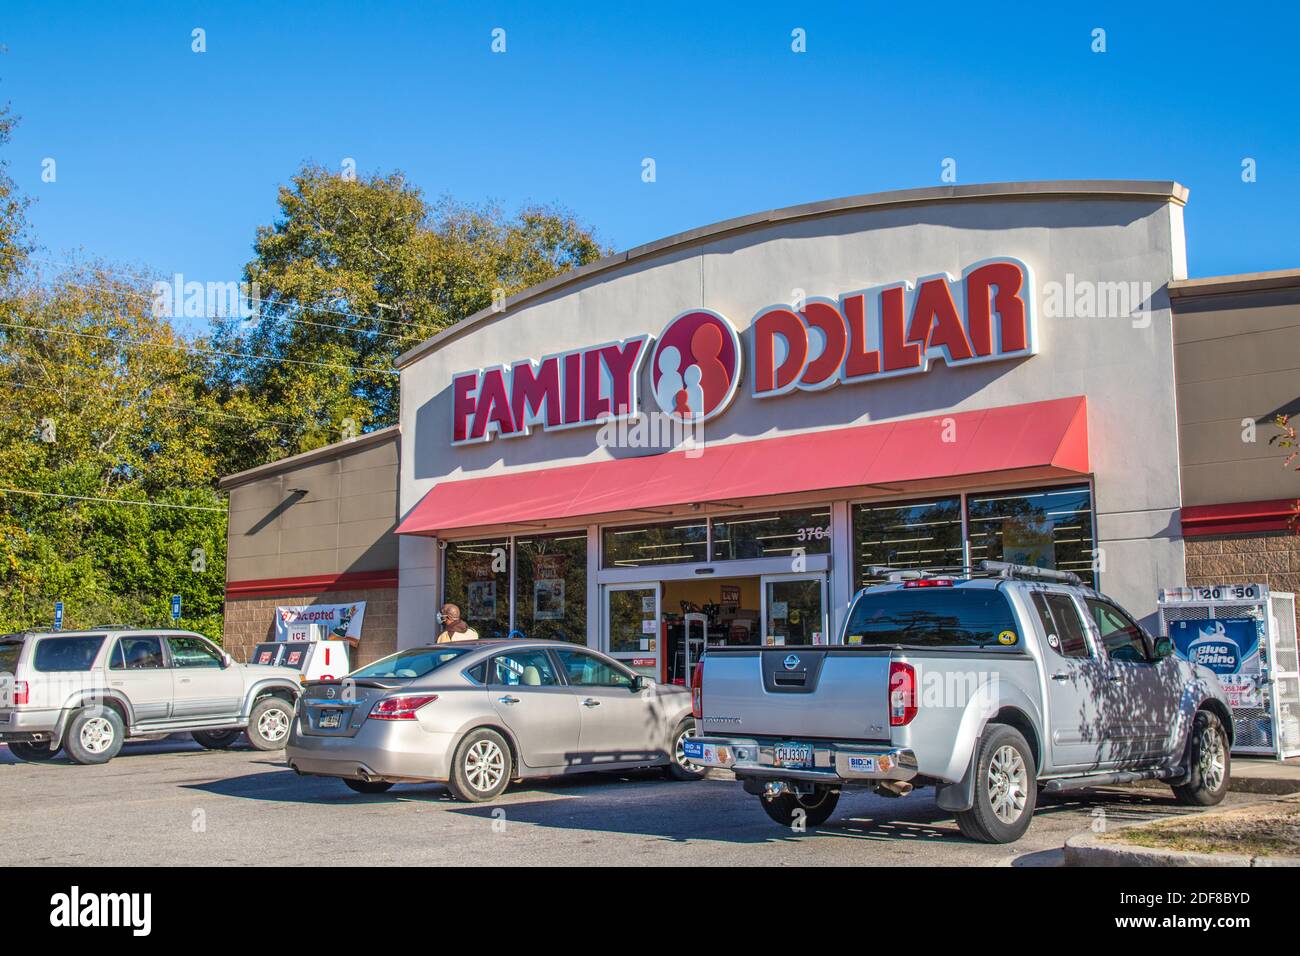 Augusta, Ga USA - 12 02 20: Family Dollar Retail Store front entrance cars people Stock Photo